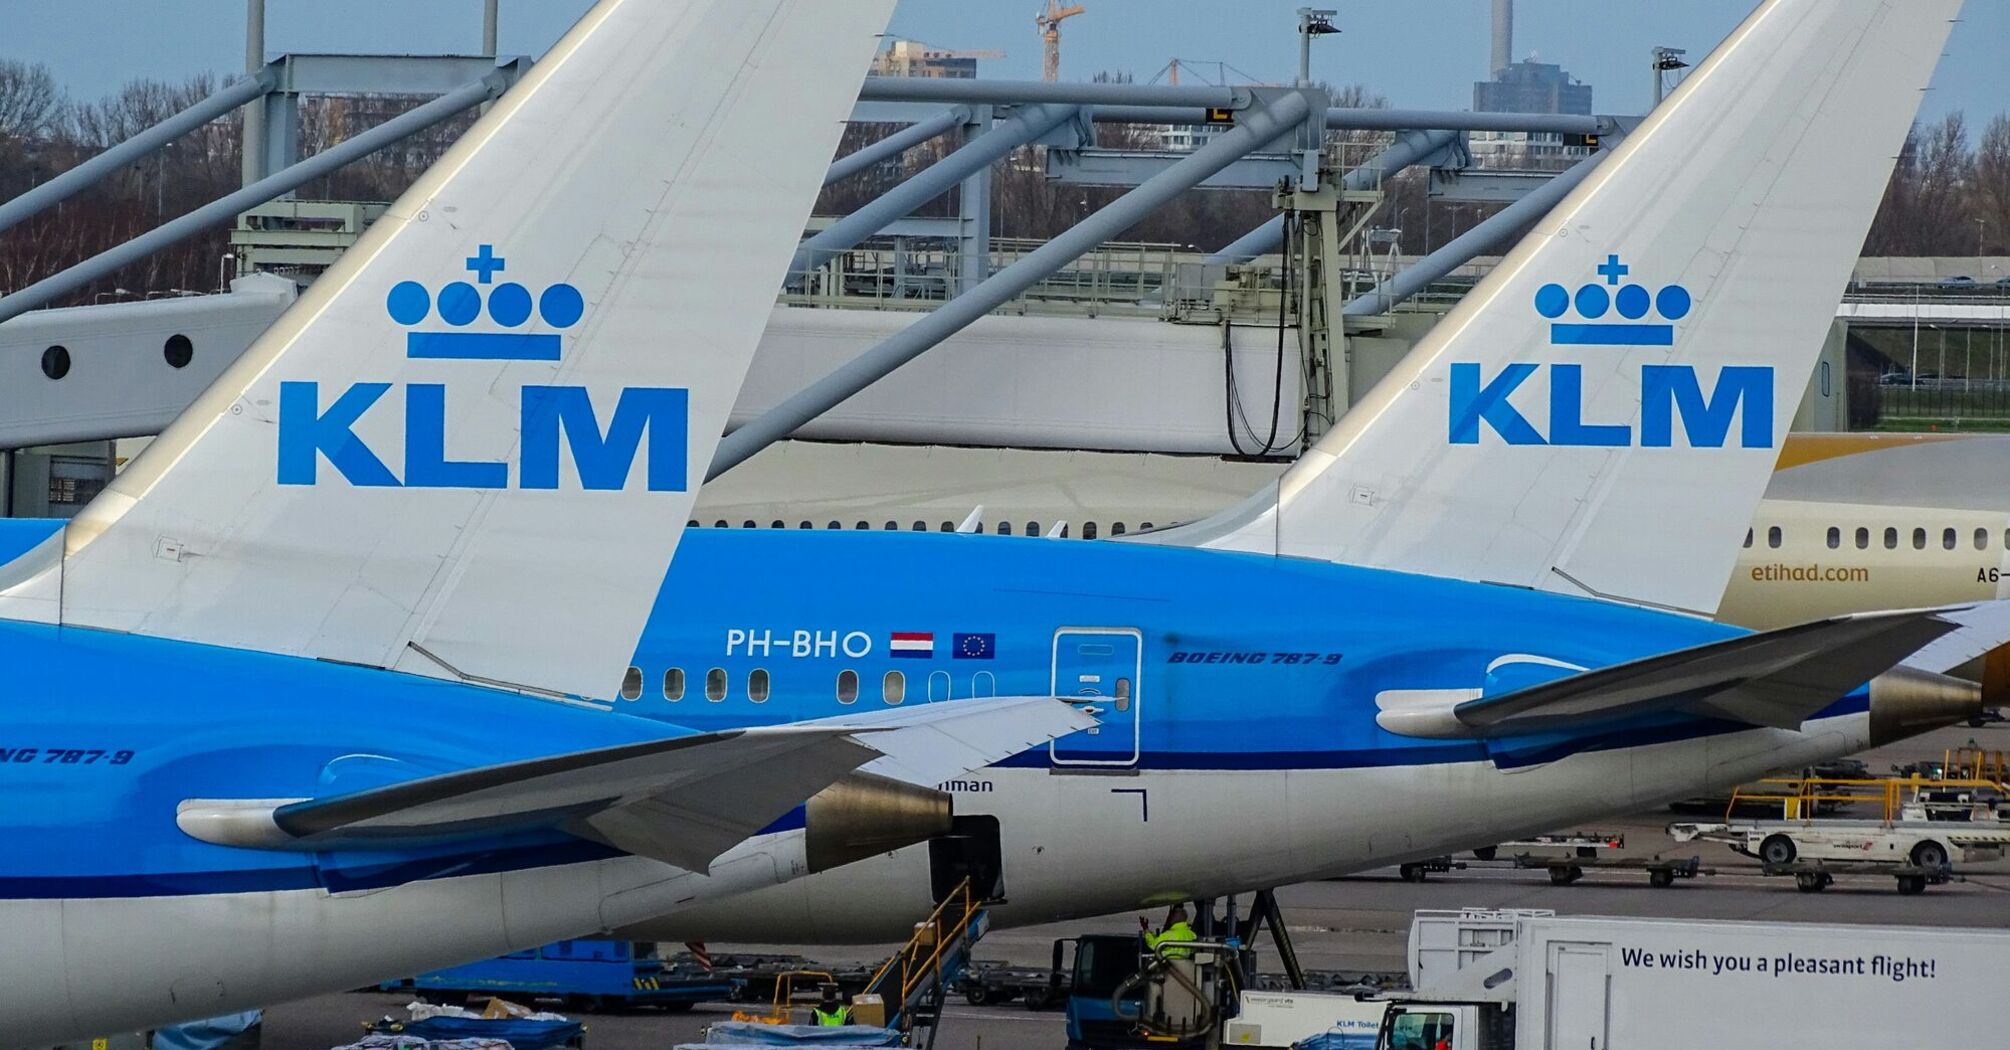 two klm airliners on tarmac